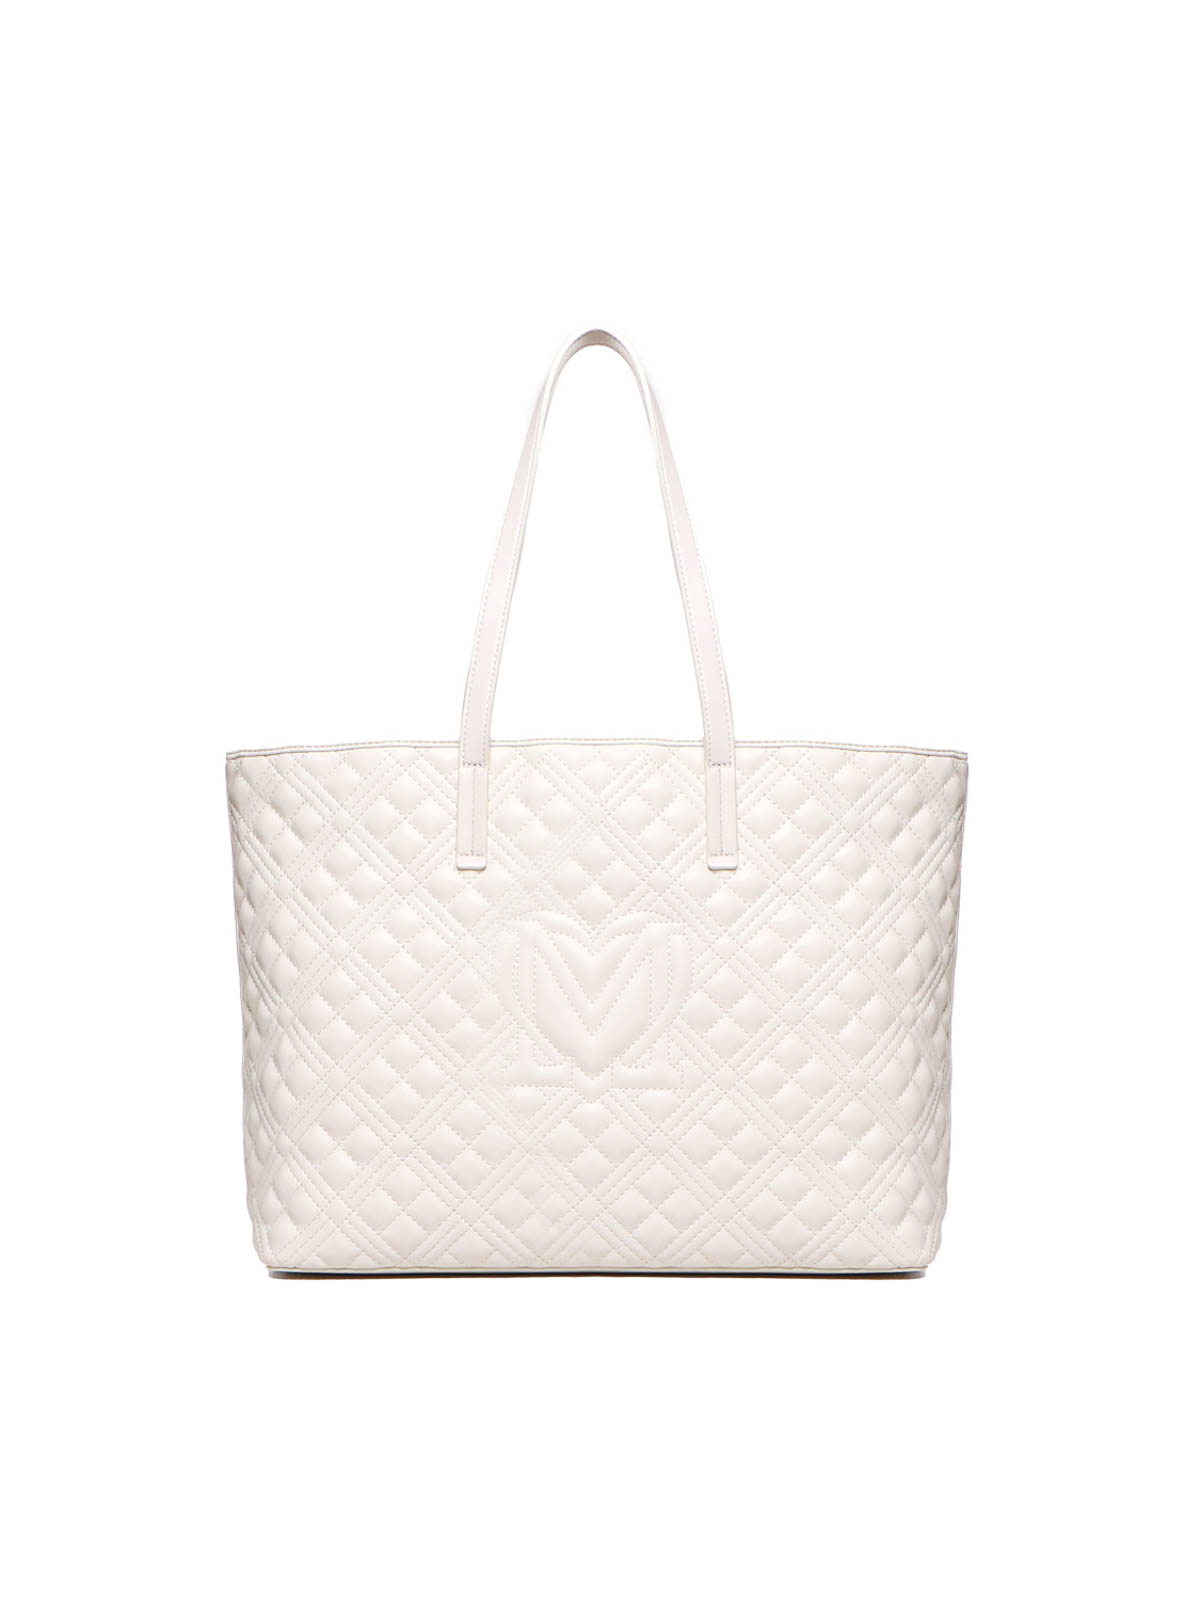 Shop Love Moschino Shoulder Bag With Logo In White